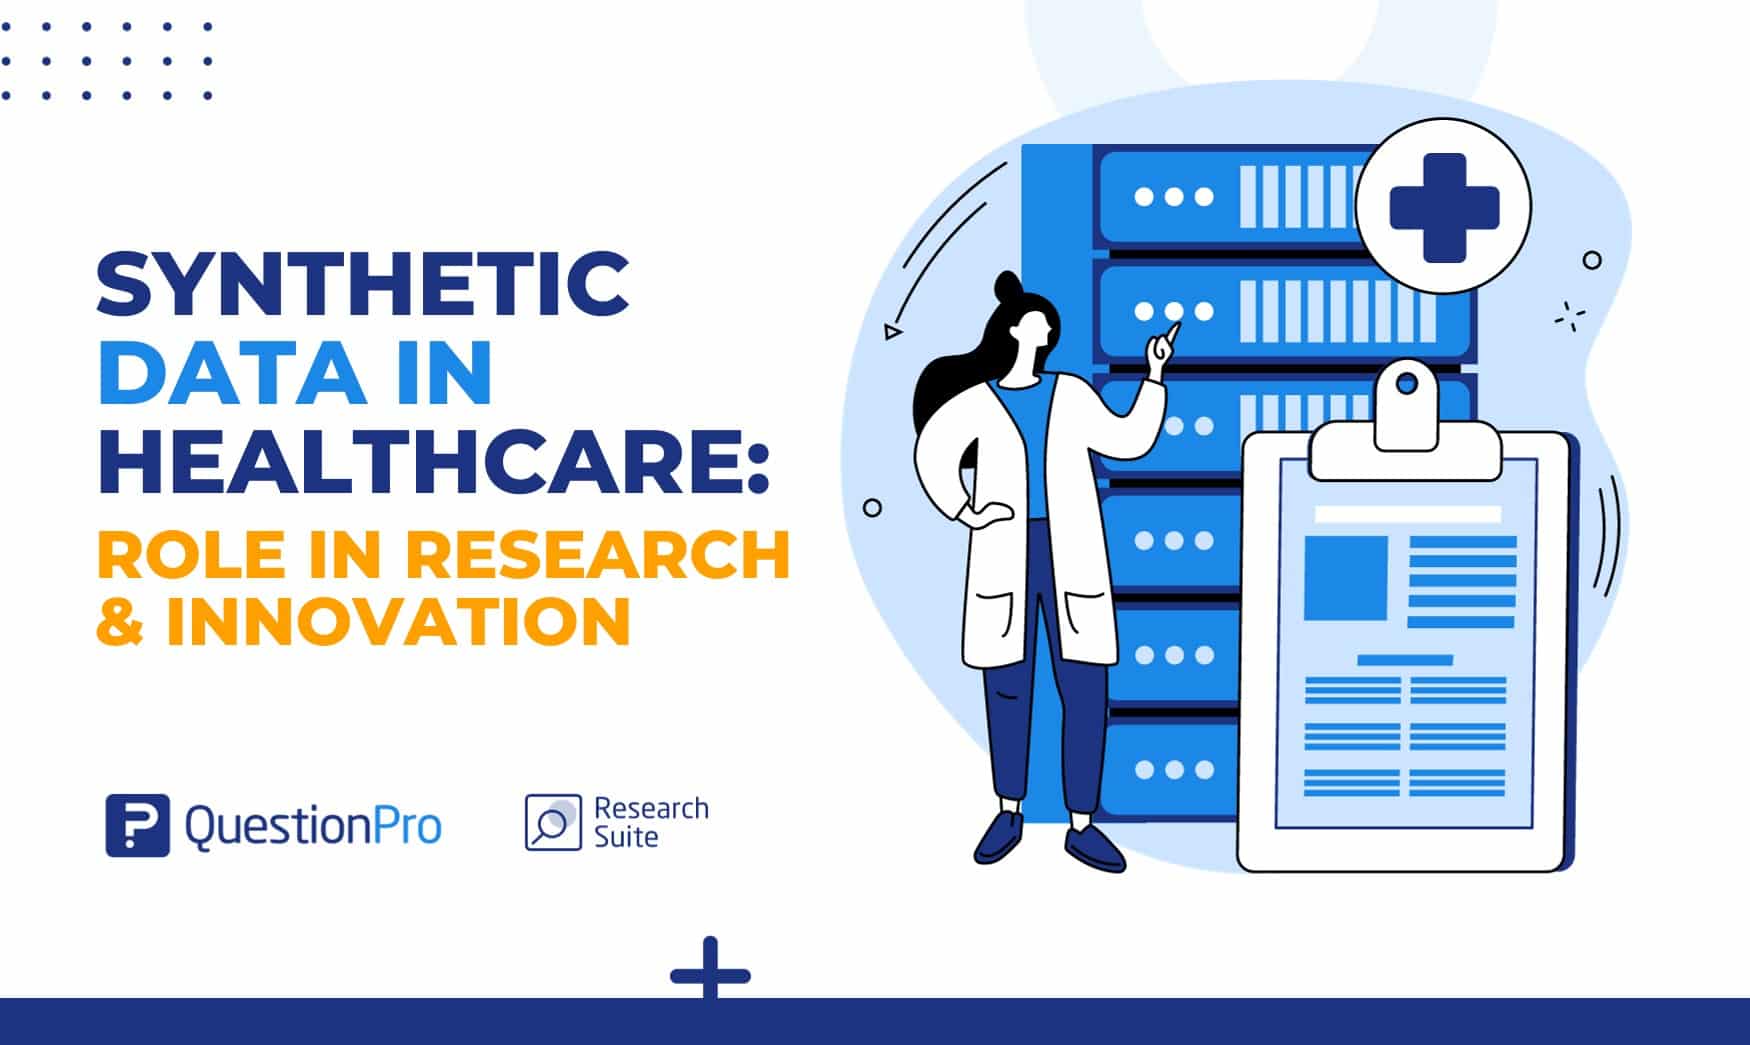 Synthetic Data in Healthcare: Role in Research & Innovation